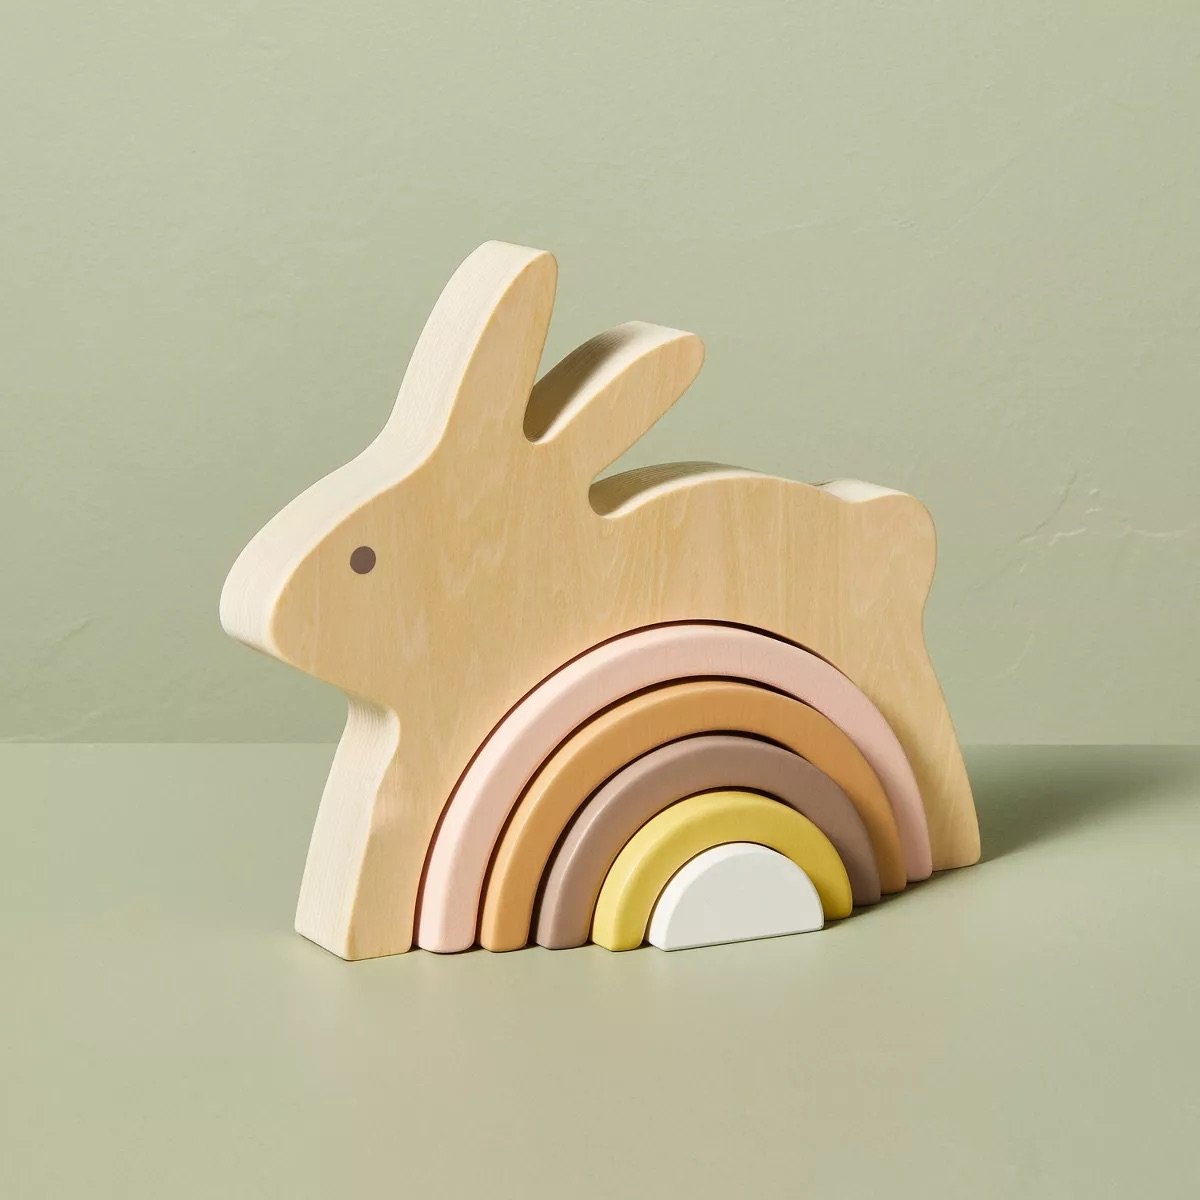 Toy Easter Bunny Wooden Block Stacker Hearth & Hand with Magnolia.jpeg